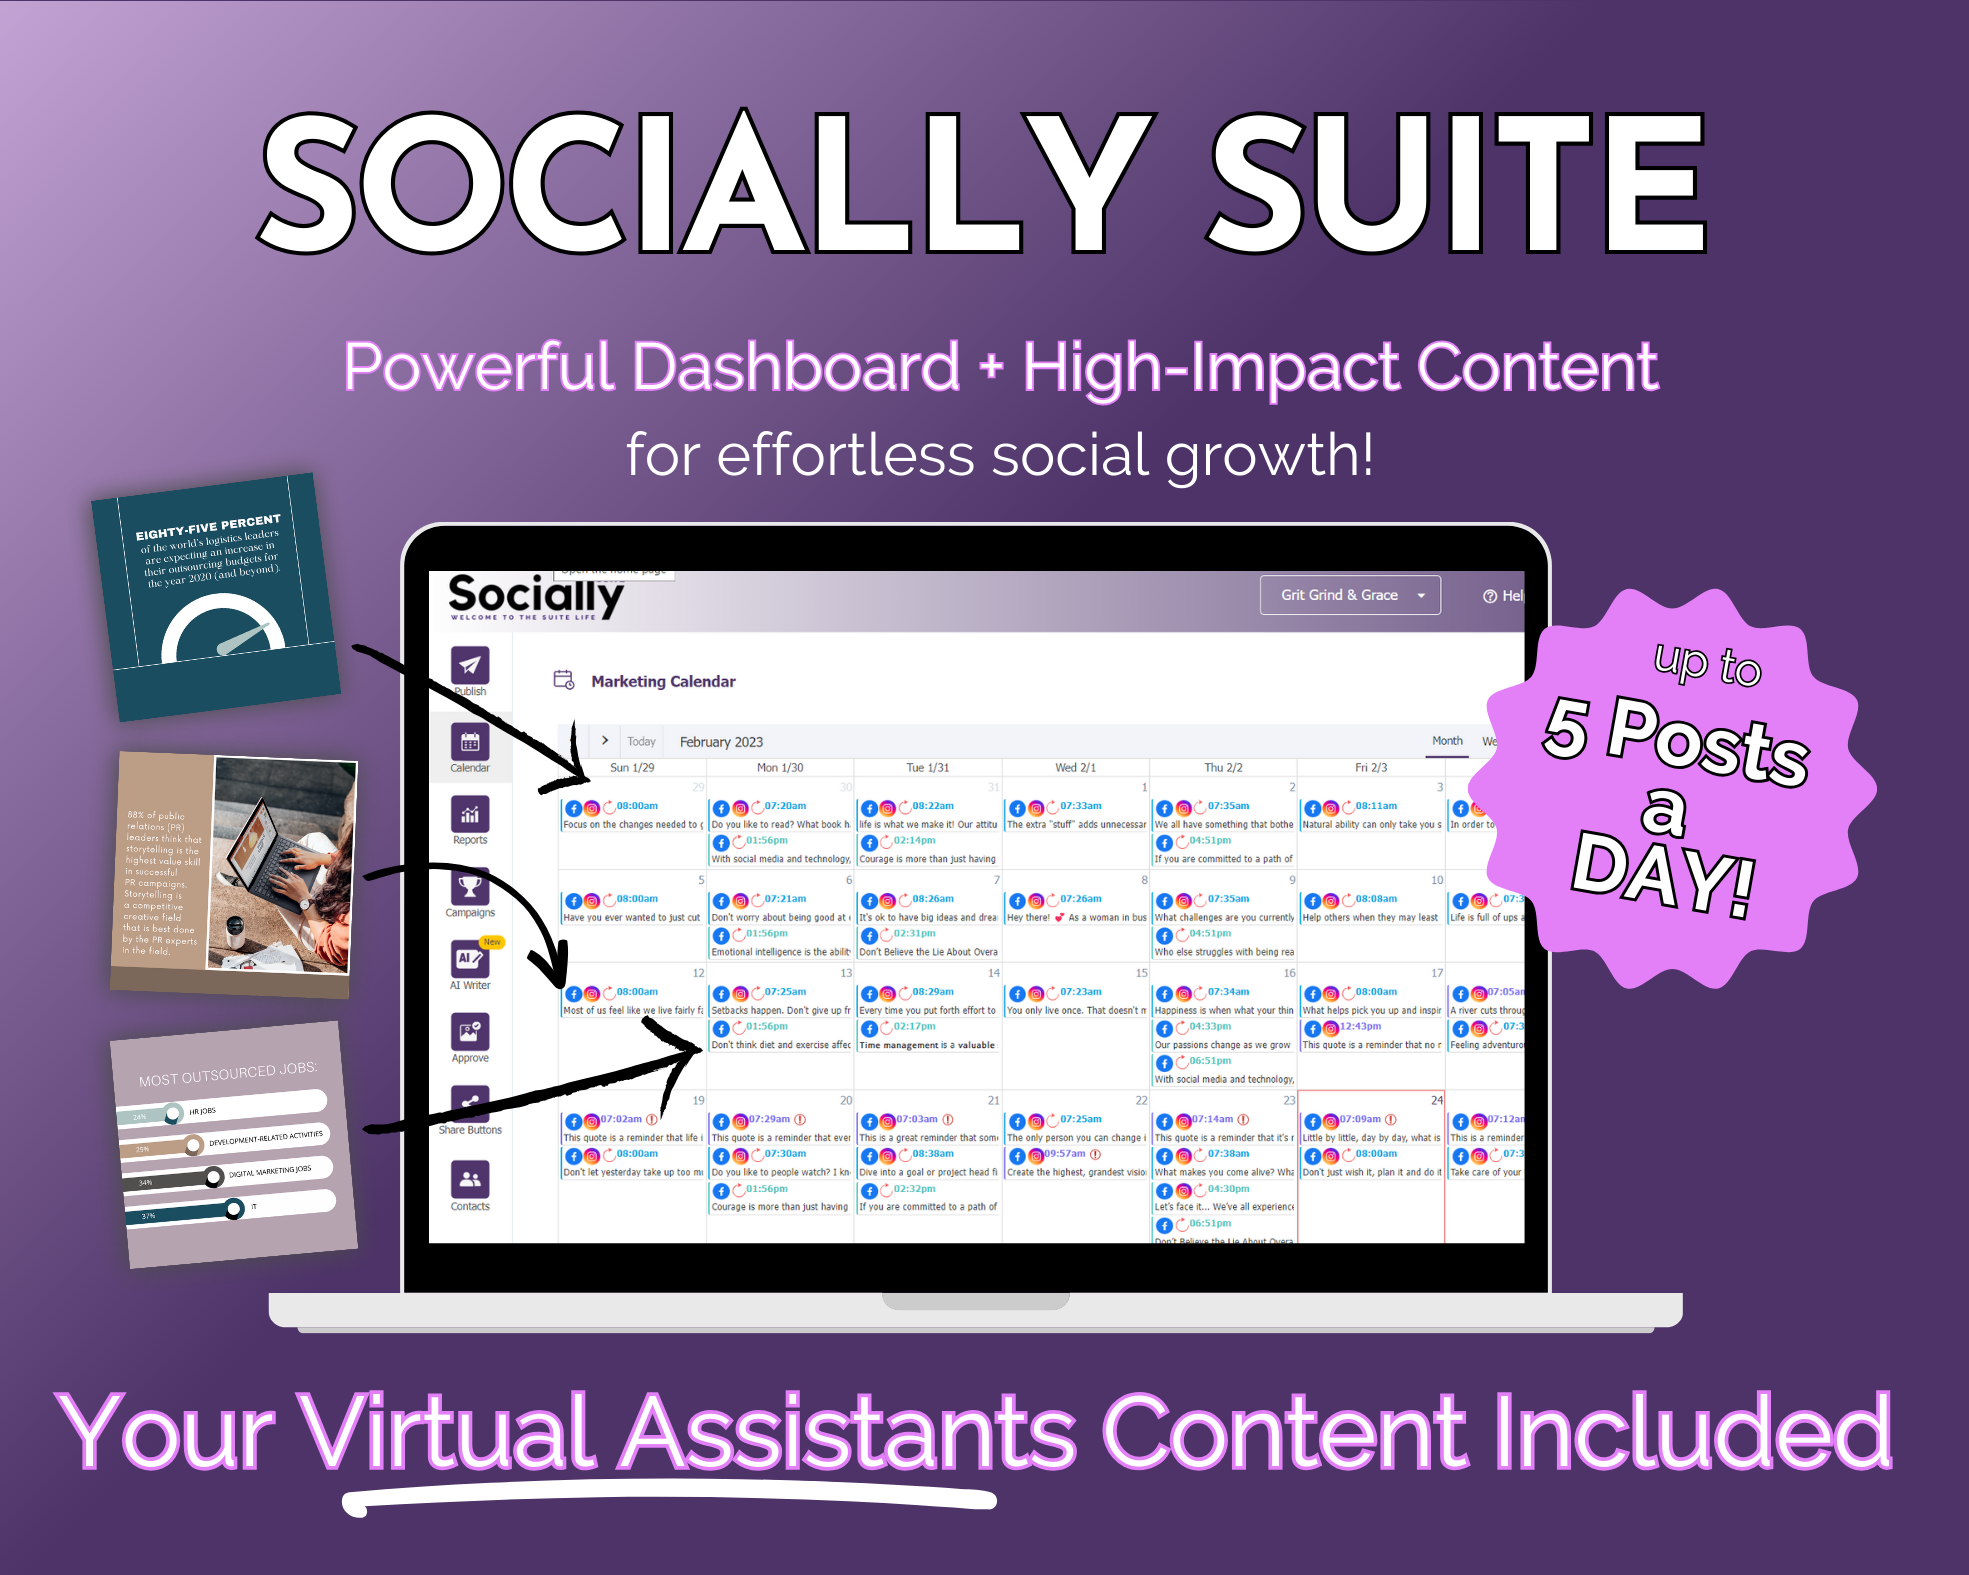 Promotional graphic for the "Get Socially Inclined Socially Suite Membership" highlighting features like a powerful content dashboard, high-impact content, and the ability to post up to 5 times a day.